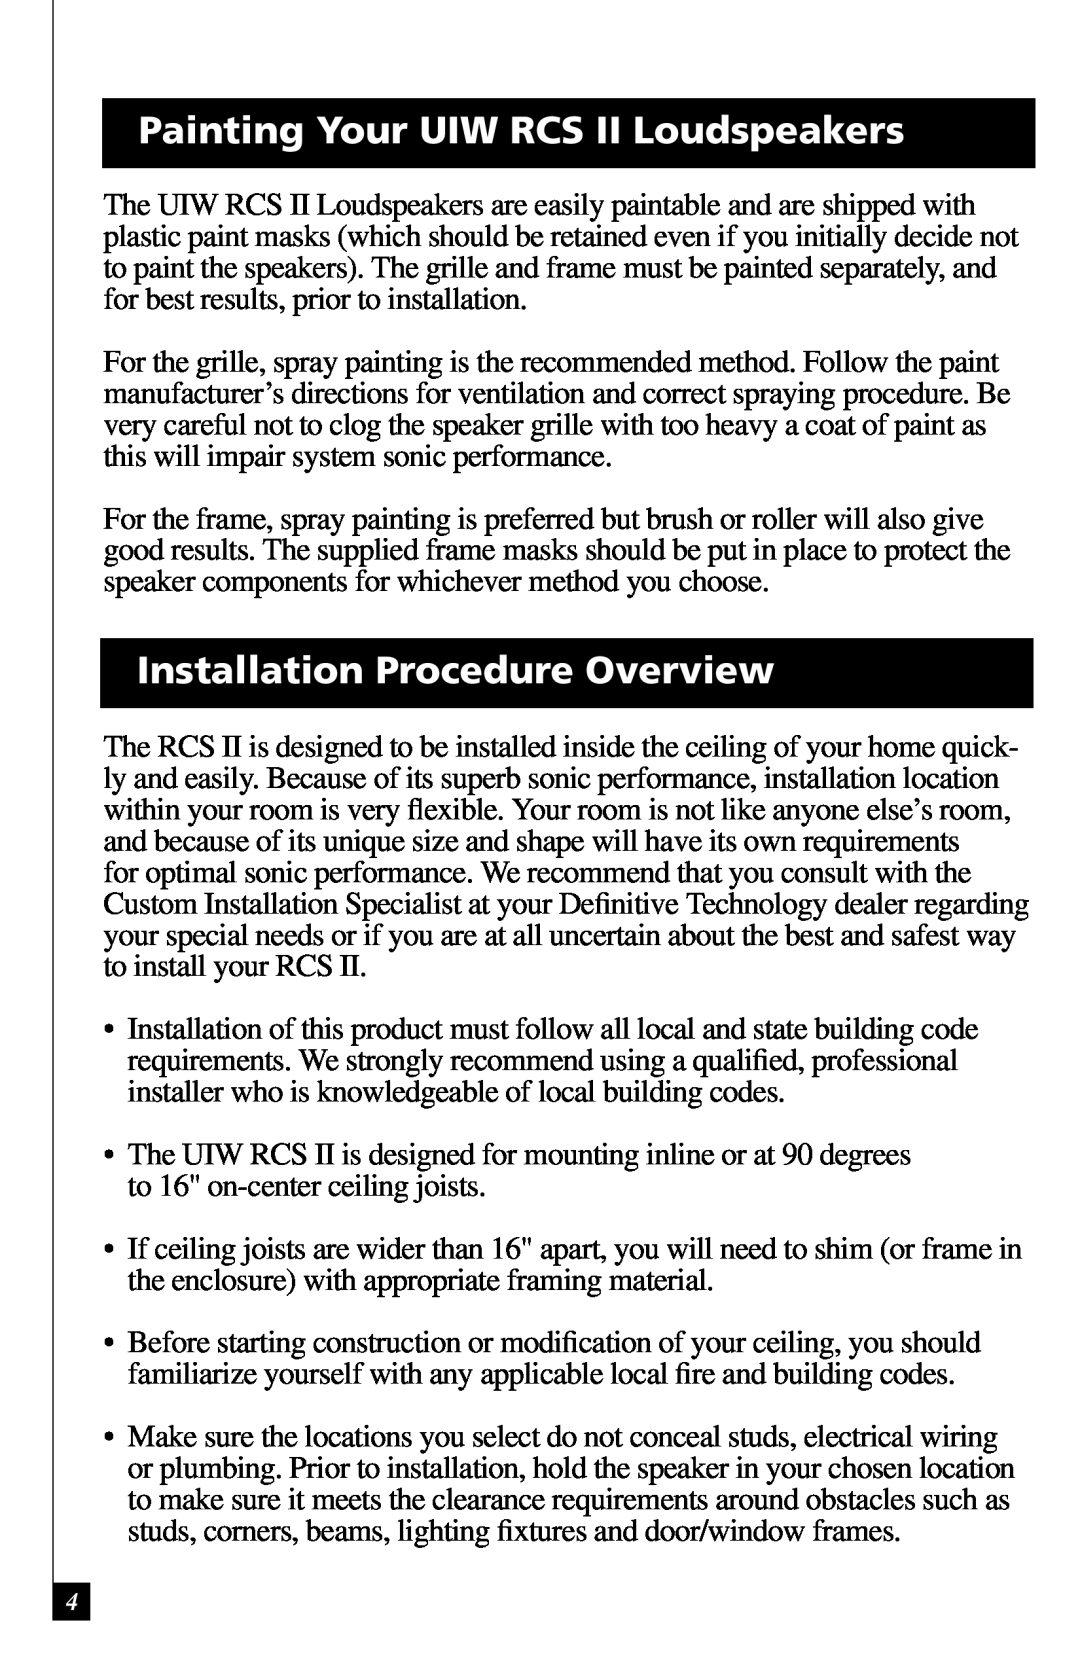 Definitive Technology owner manual Painting Your UIW RCS II Loudspeakers, Installation Procedure Overview 